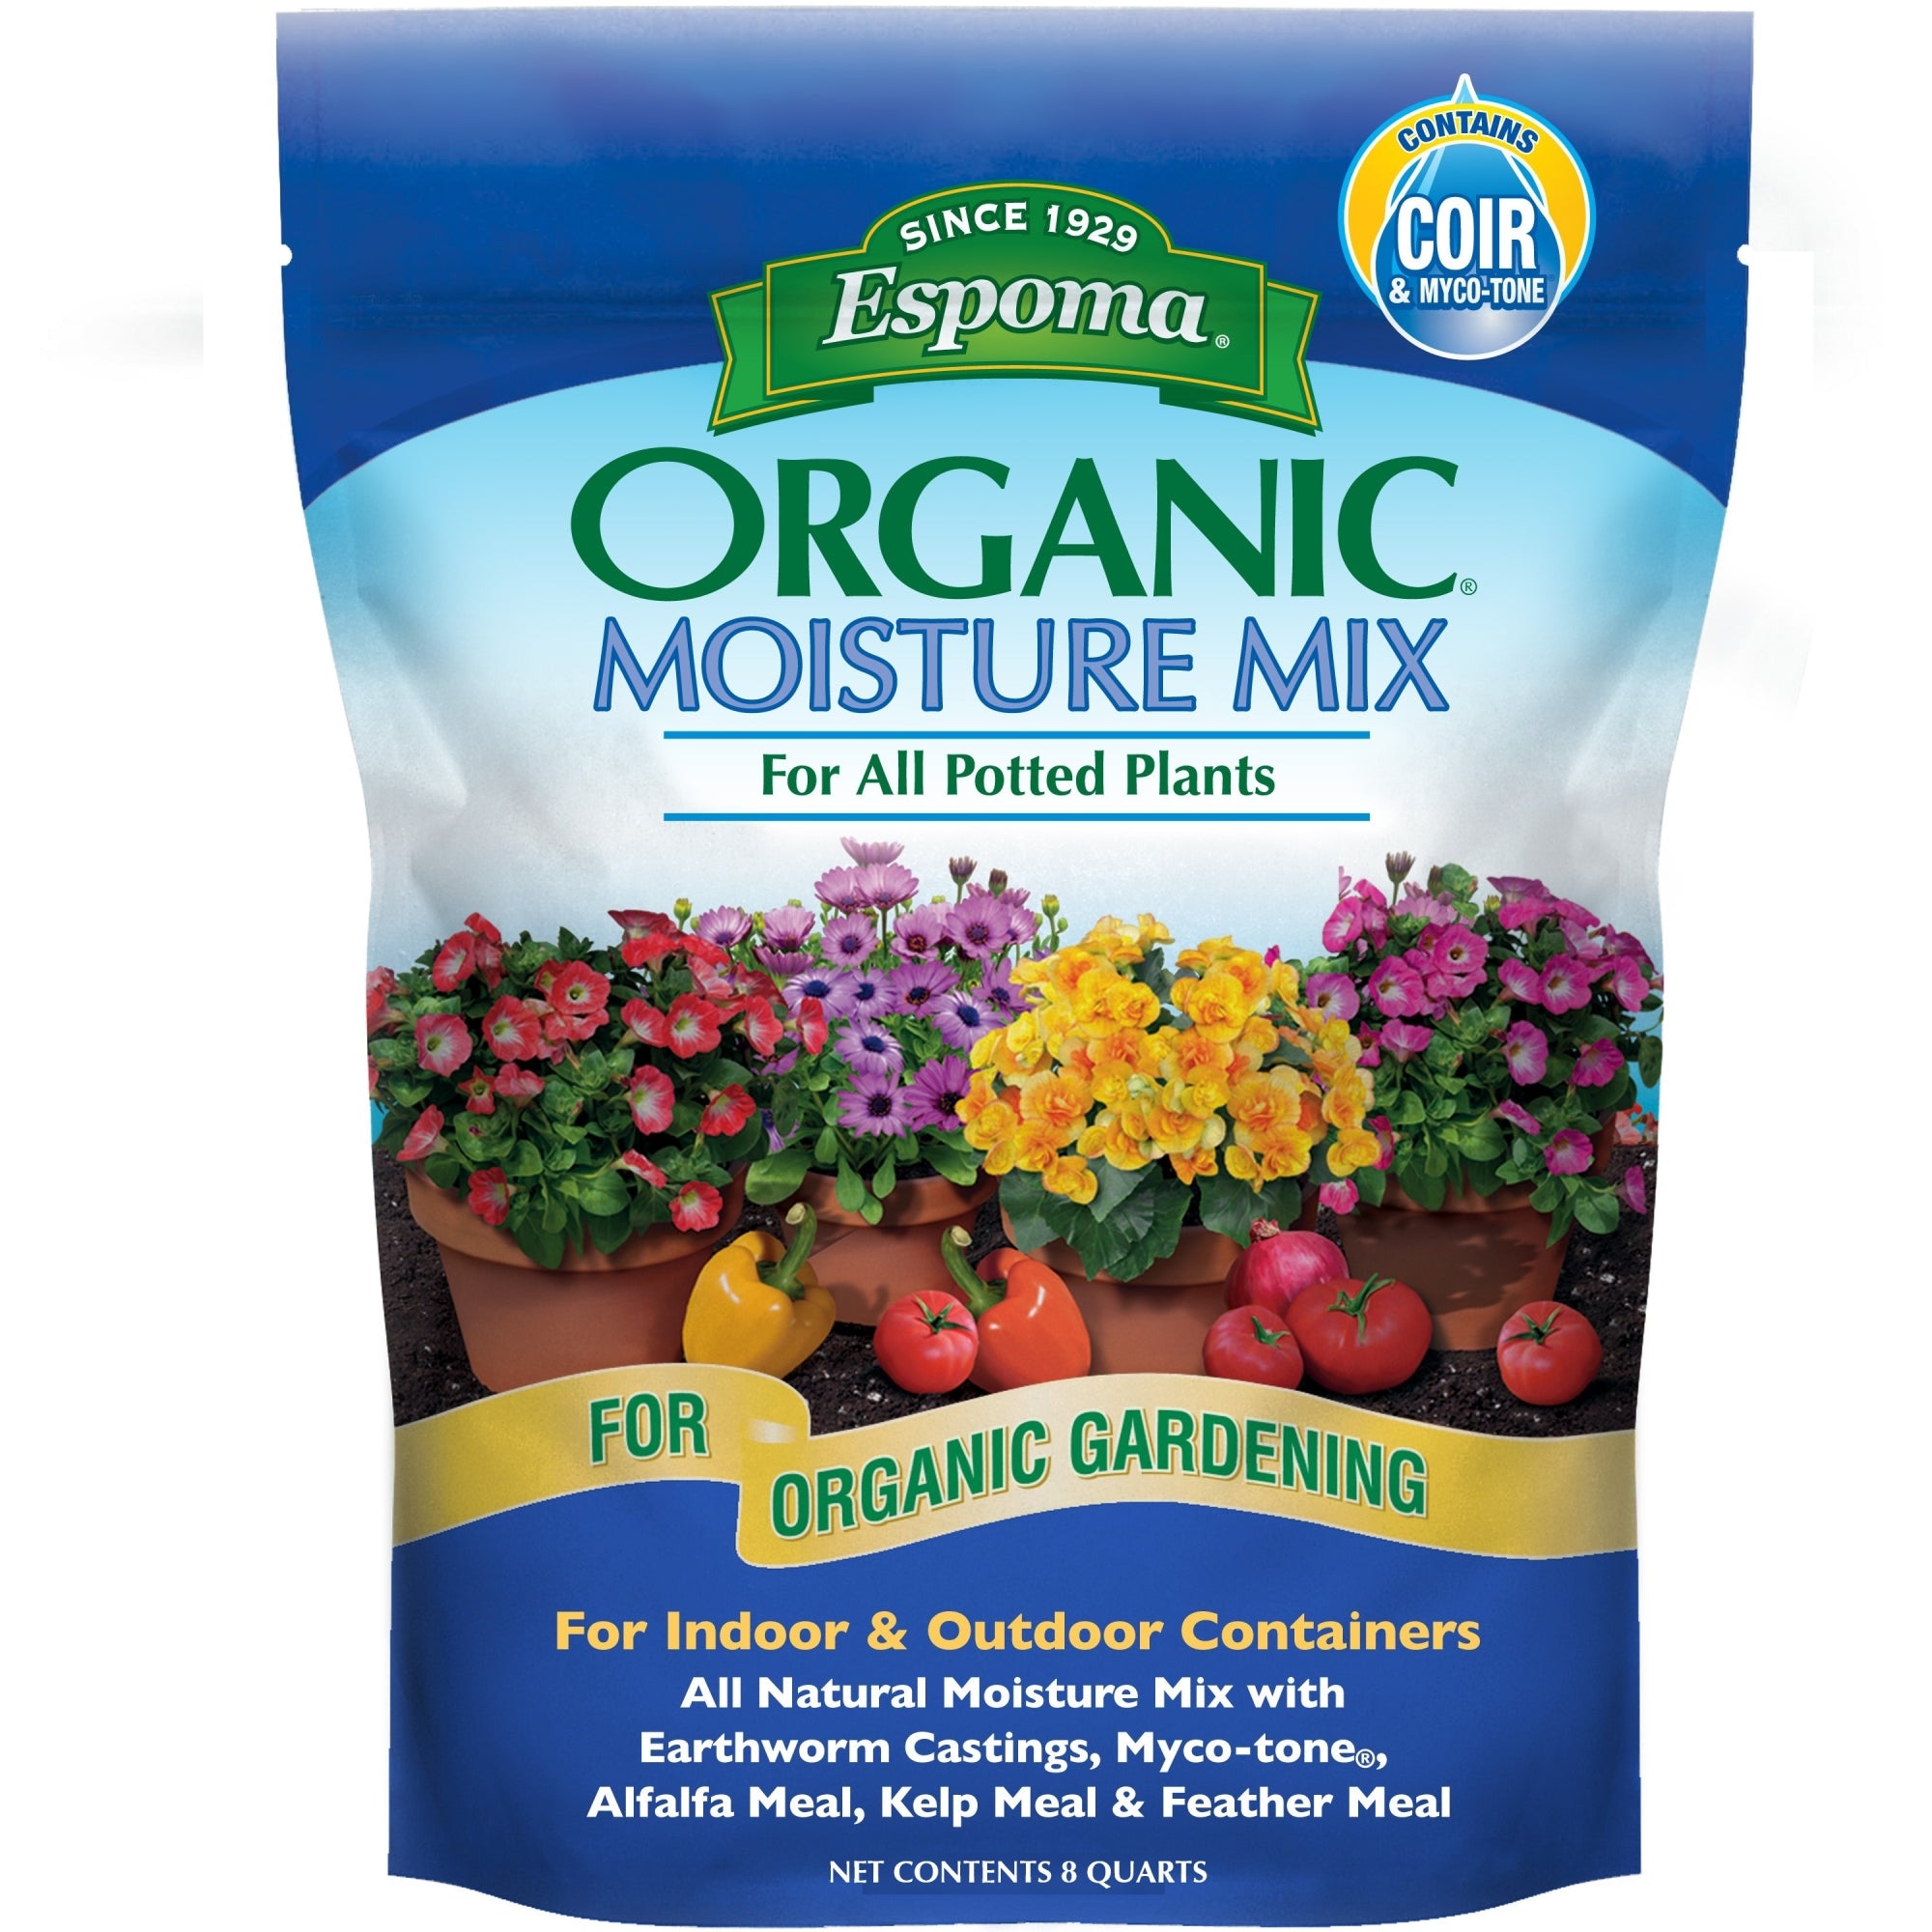 Espoma Organic Moisture Mix with Coir & Myco-tone for All Indoor and Outdoor Potted Plants, for Organic Gardening